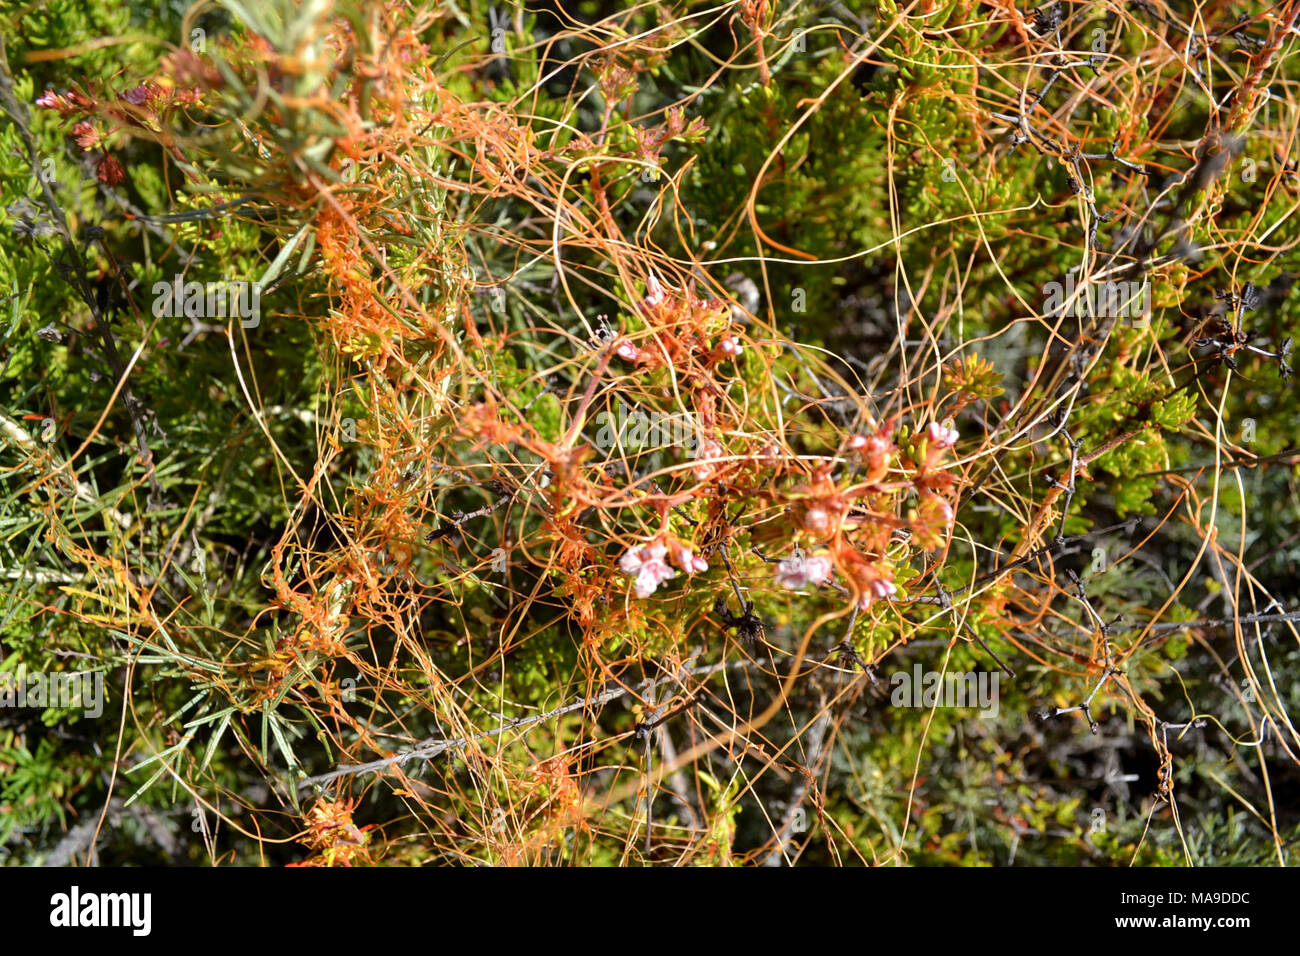 Parasitic dodder in bloom (Cuscuta pacifica). This subspecies of dodder is found on only salt marsh plants.  Dodder is an unmistakable mesh of bright, thread-like orange branching, with no ground contact.  It gets its water from attaching its roots to other plants.  The tiny light pink blooms are its flowers. Interesting fact: this plant lacks chlorophyll! Stock Photo